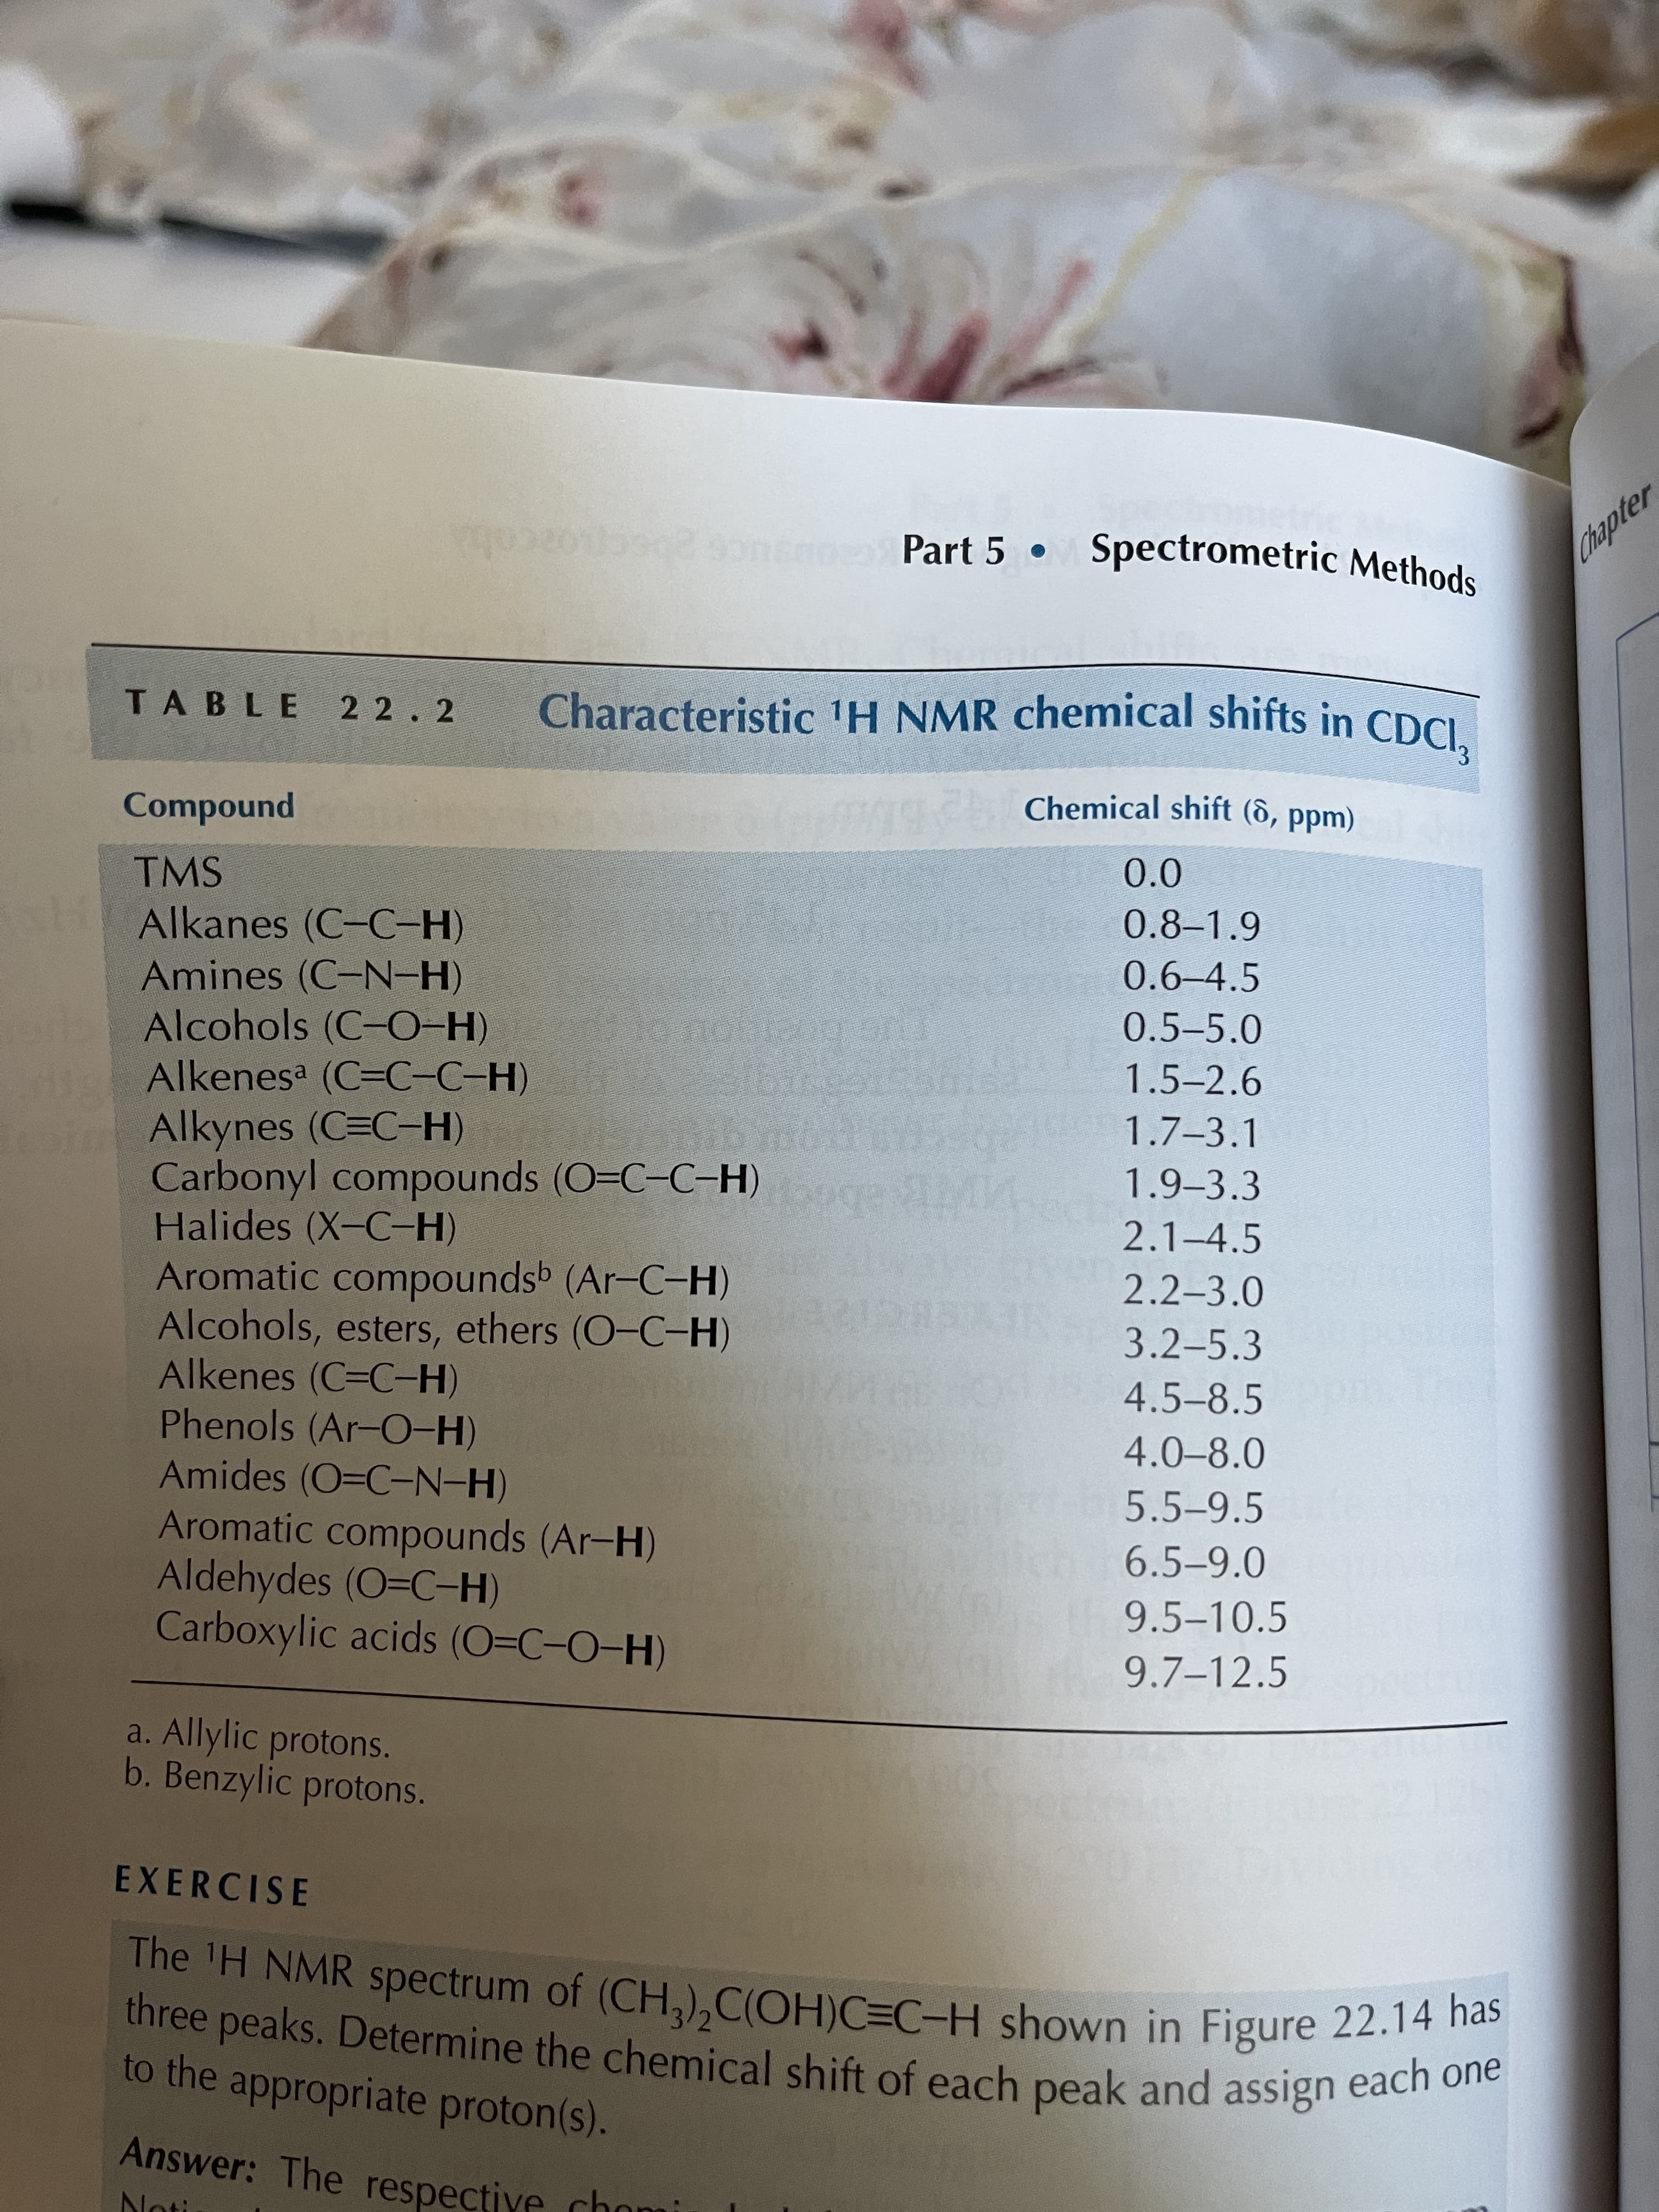 c2013902onno Part 5 •
Spectrometric Methods
TABLE 22.2
Characteristic 'H NMR chemical shifts in CDCI.
Chemical shift (6, ppm)
punoduwoɔ
0.0
TMS
0.8-1.9
Alkanes (C-C-H)
0.6-4.5
Amines (C-N-H)
Alcohols (C-O-H)
Alkenesa (C=C-C-H)
Alkynes (C=C-H)
Carbonyl compounds (O=C-C-H)
Halides (X-C-H)
Aromatic compoundsb (Ar-C-H)
Alcohols, esters, ethers (O-C-H)
Alkenes (C=C-H)
Phenols (Ar-O-H)
Amides (O=C-N-H)
Aromatic compounds (Ar-H)
Aldehydes (O=C-H)
Carboxylic acids (O=C-O-H)
0.5-5.0
1.5-2.6
1.7-3.1
1.9-3.3
2.1-4.5
2.2-3.0
3.2-5.3
4.5-8.5
4.0-8.0
5.5-9.5
6.5-9.0
9.5-10.5
9.7-12.5
a. Allylic protons.
b. Benzylic protons.
EXERCISE
The 'H NMR spectrum of (CH,),C(OH)C=C-H shown in Figure 22. one
three peaks. Determine the chemical shift of each peak and assign each
to the appropriate proton(s).
Answer: The respective ch
